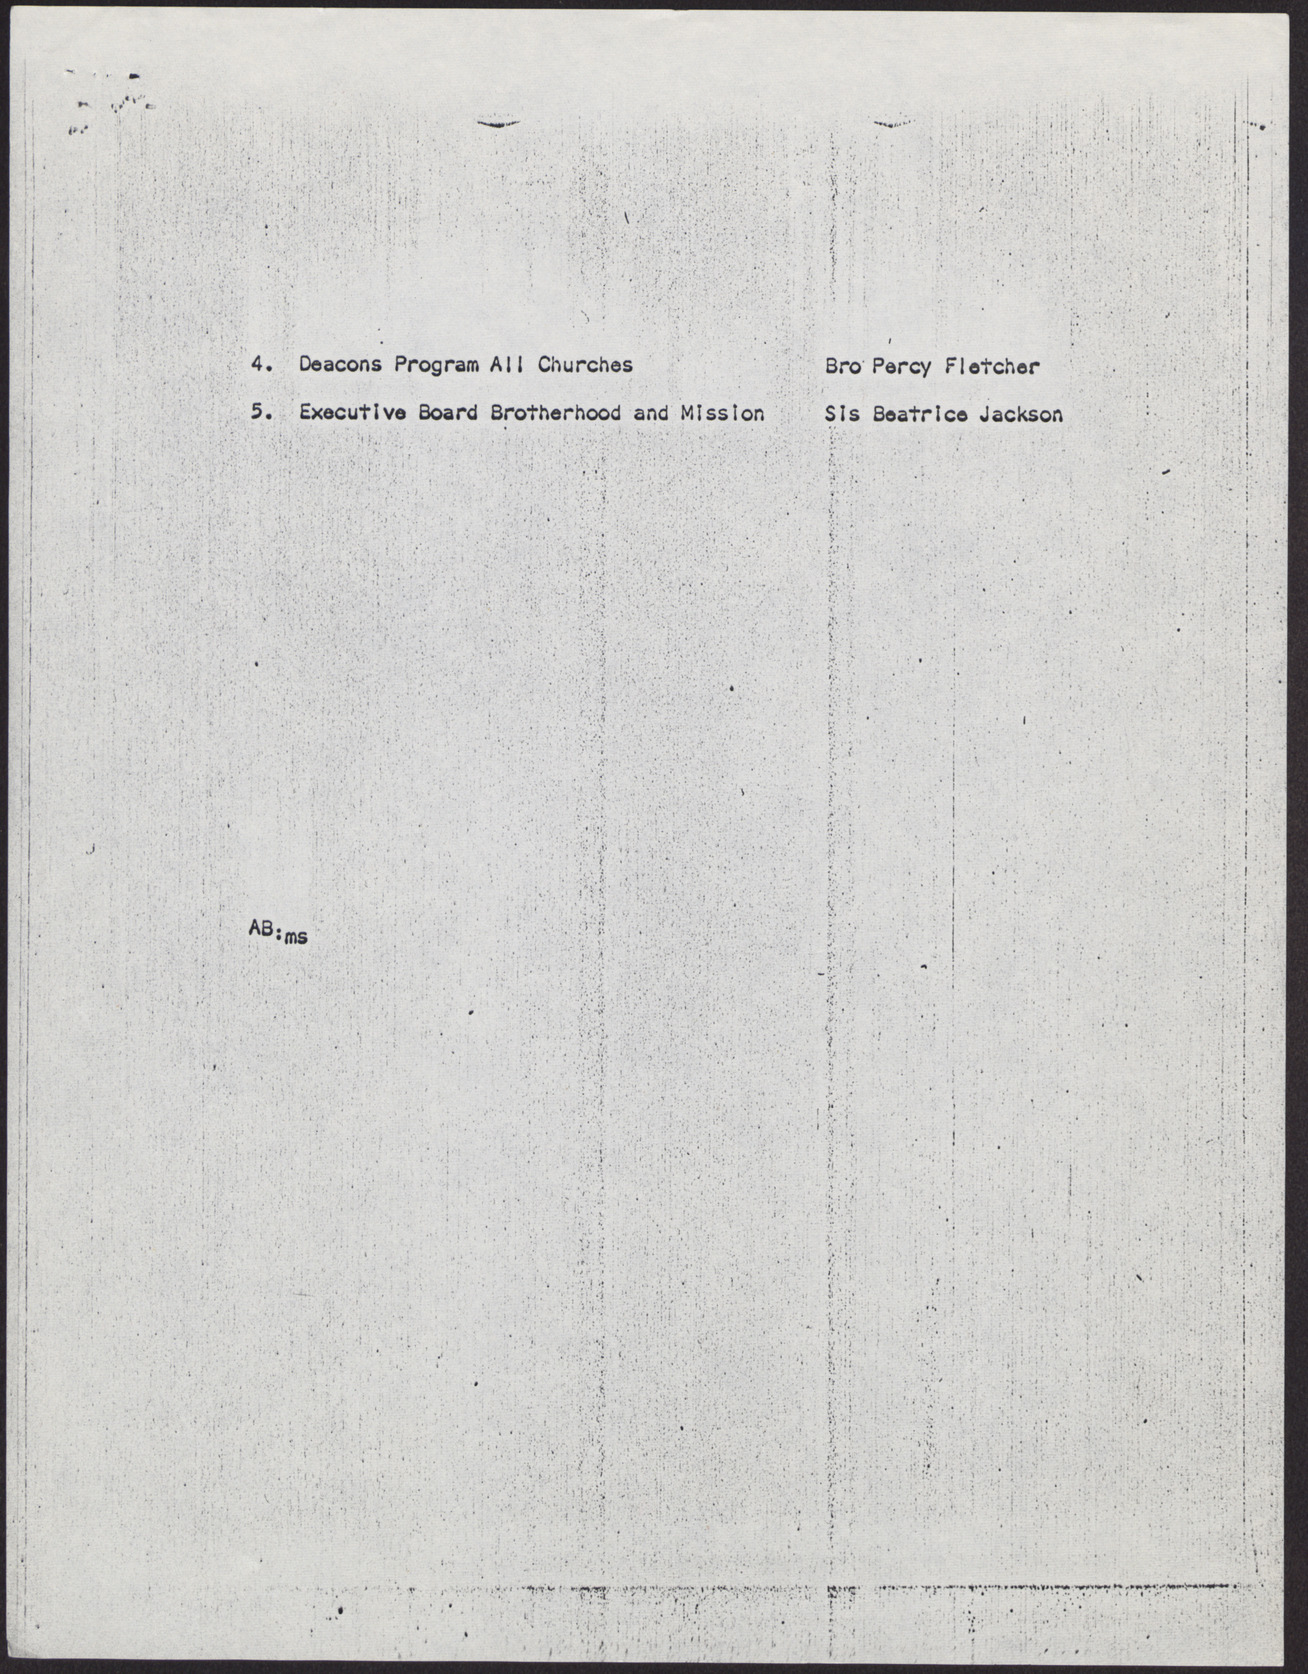 Mission Program for the year of 1969 (2 pages), July 7, 1968, page 2